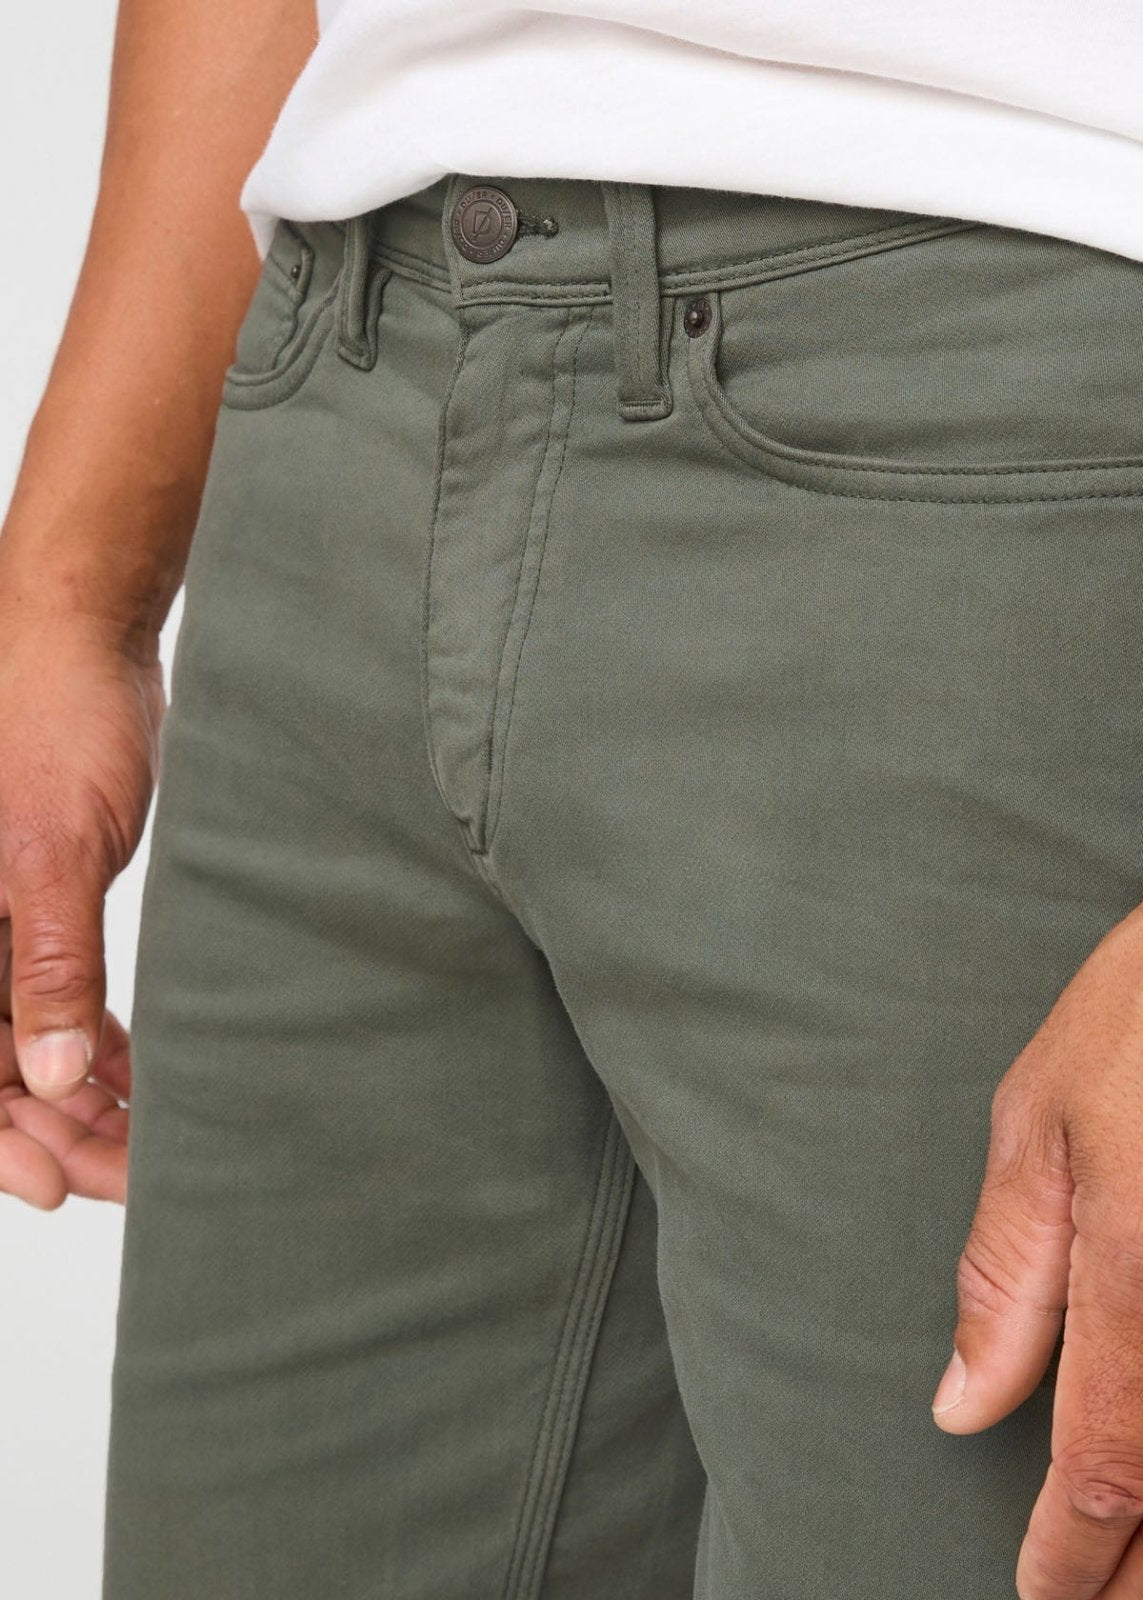 mens grey-green relaxed fit performance short front waistband detail